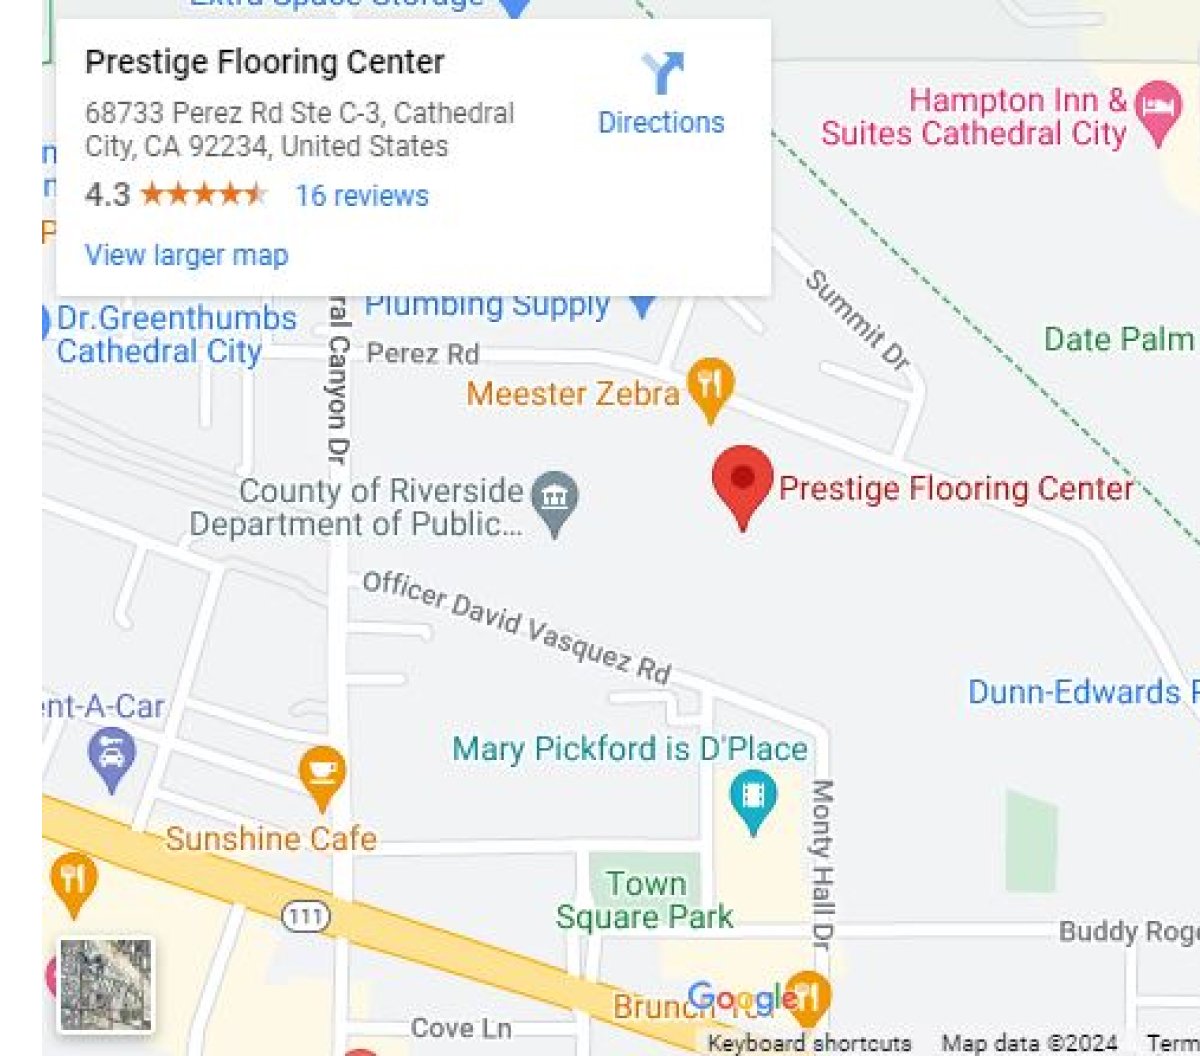 Prestige Flooring Center showroom's location in Cathedral City, CA